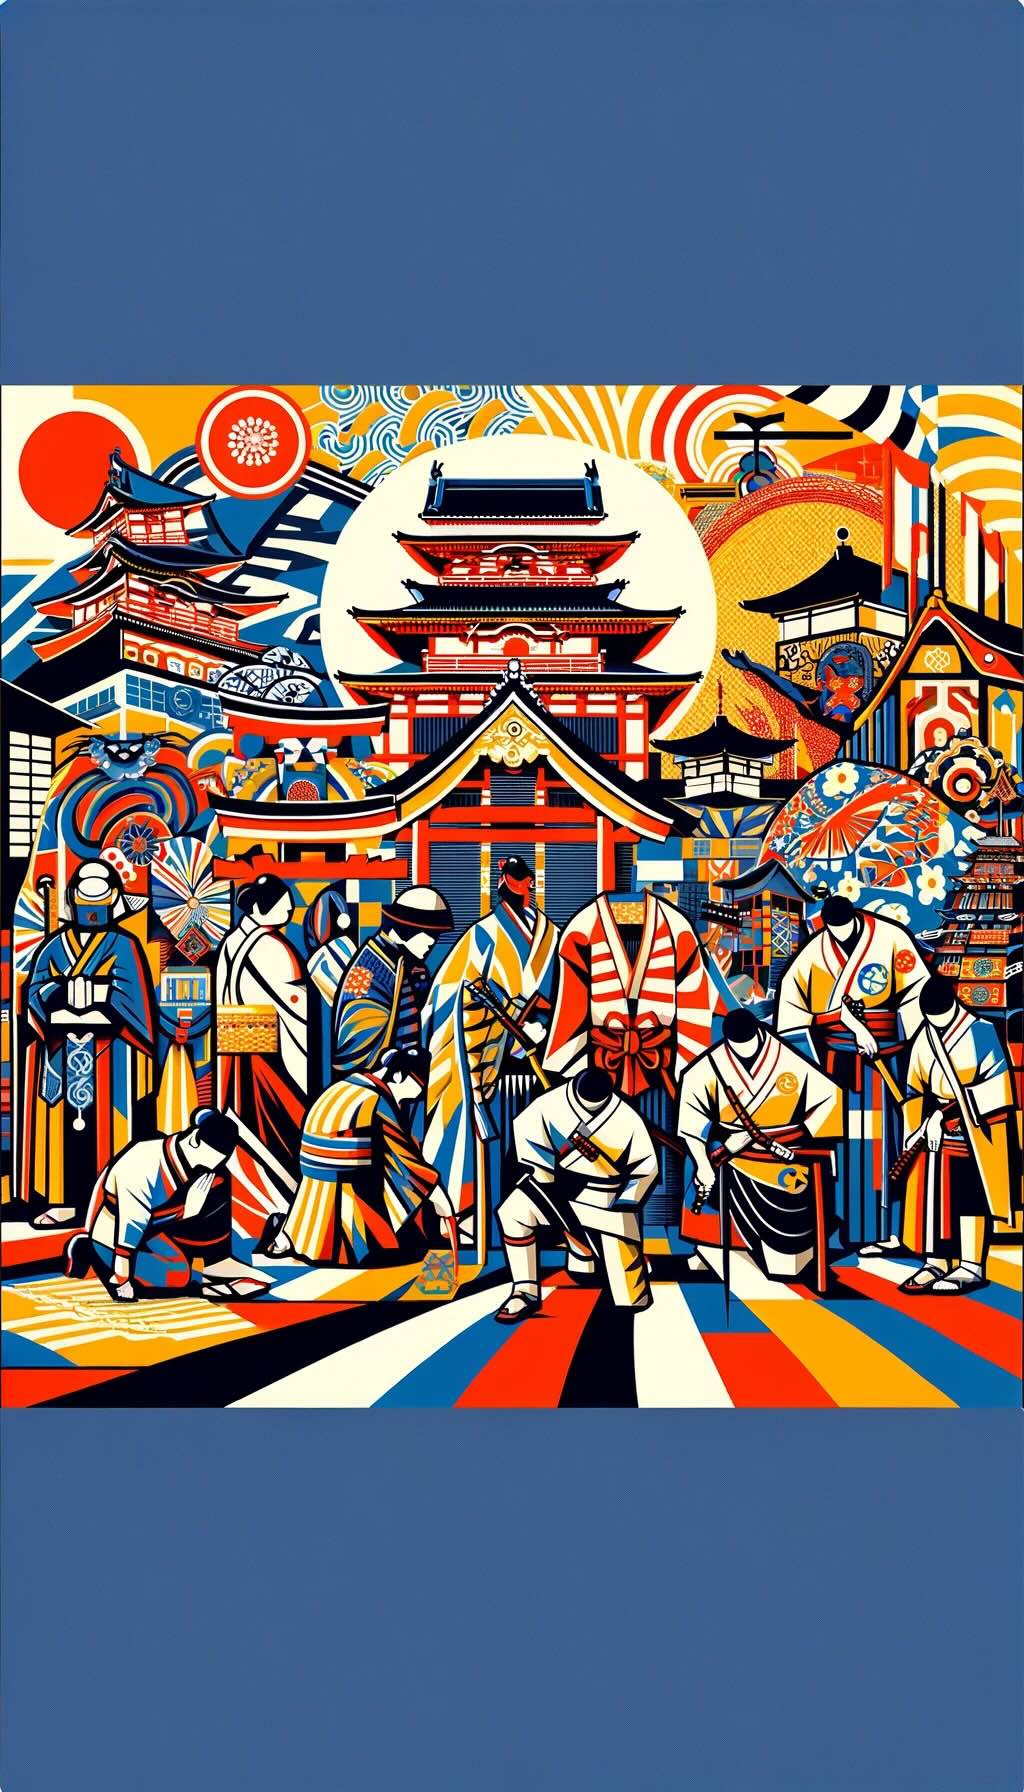 Historical significance of bowing in Japan,portrays various historical periods, from ancient Shinto rituals to the era of the samurai class in feudal Japan. The elements representing Shinto shrines and Buddhist temples, highlighting the religious influences on the practice of bowing. Figures resembling samurai are also depicted, symbolizing the role of bowing in feudal Japan and its association with the samurai code of conduct illustrating the enduring cultural significance of bowing in Japanese society.